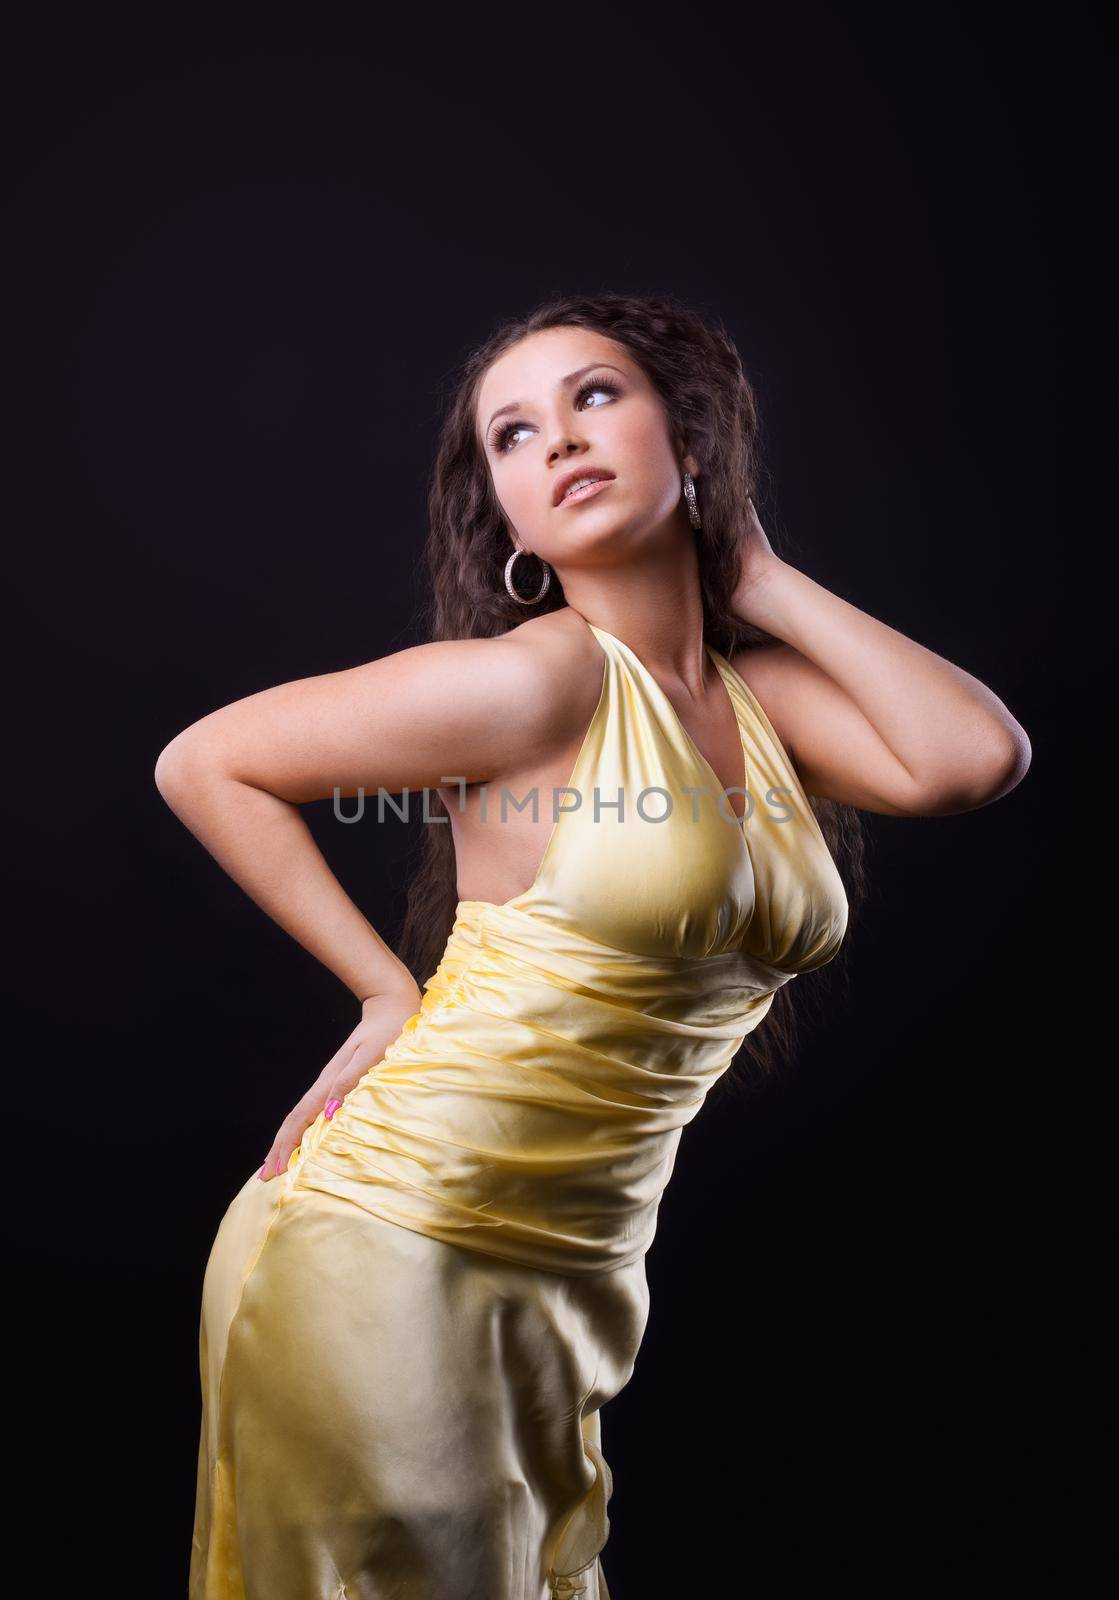 Beauty woman in yellow cloth by rivertime